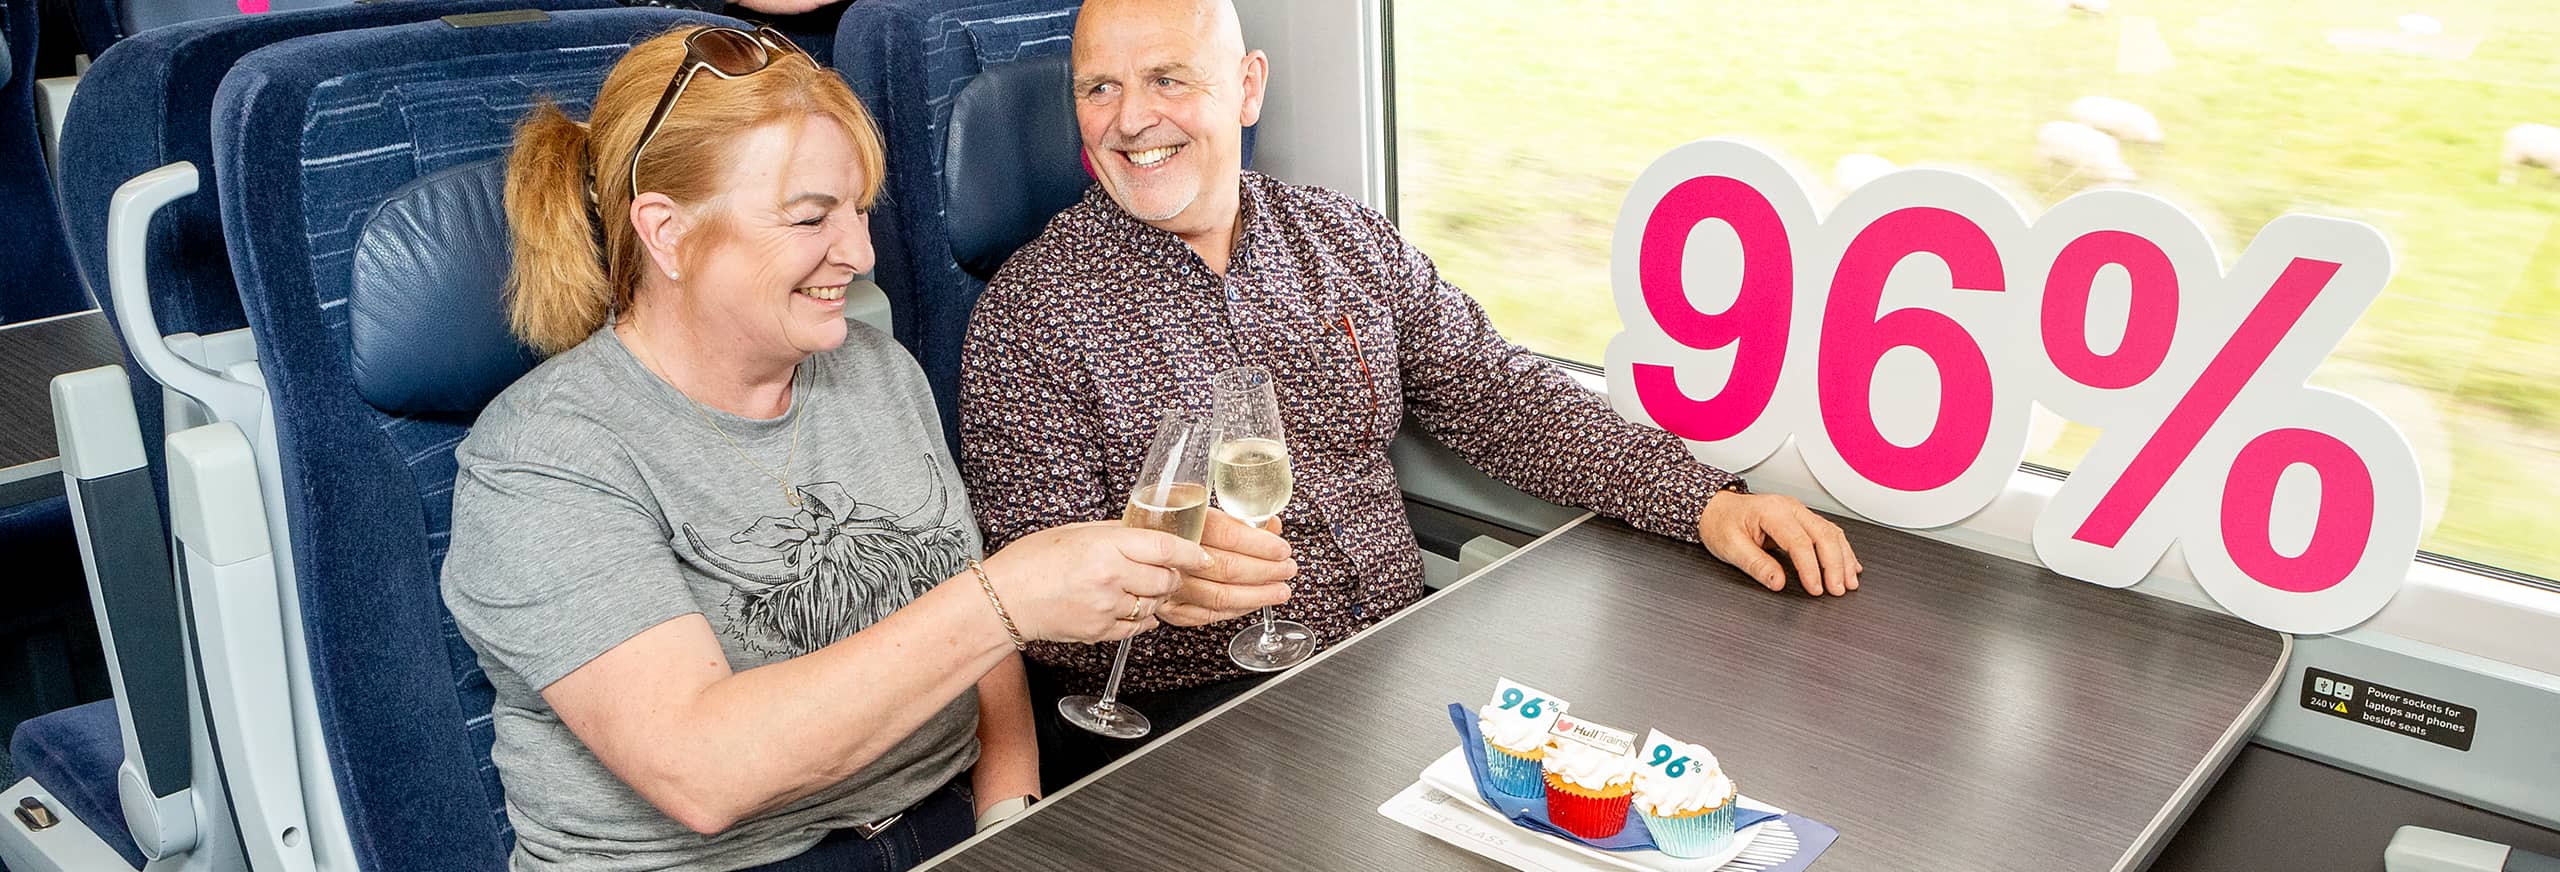 Hull Trains customers onboard travelling to London and celebrating